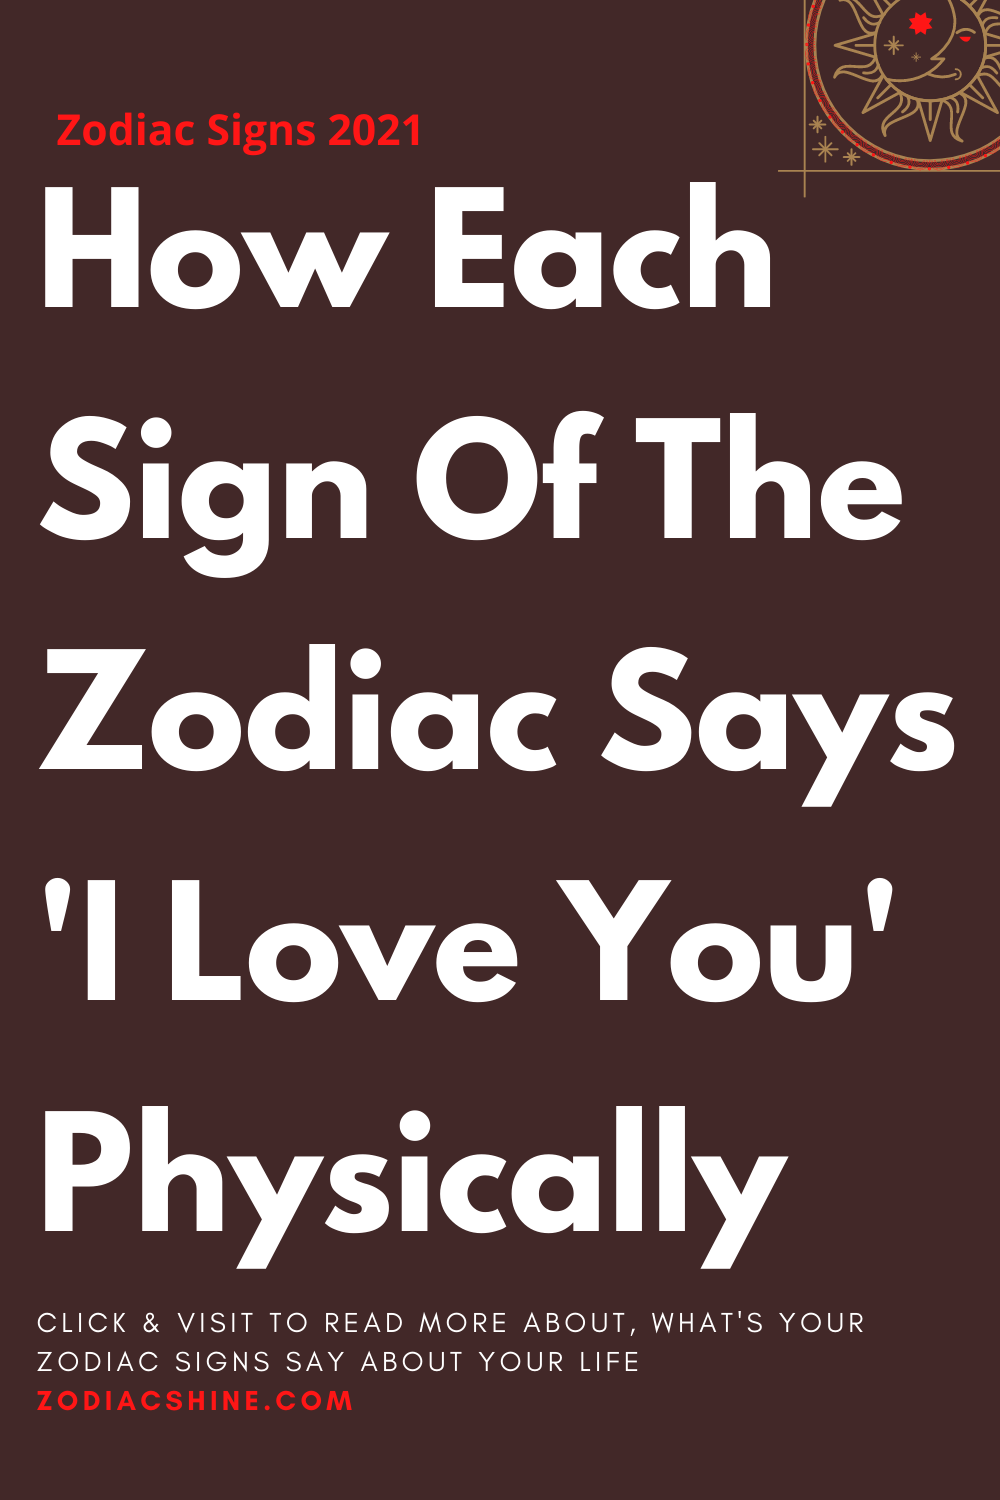 How Each Sign Of The Zodiac Says 'I Love You' Physically